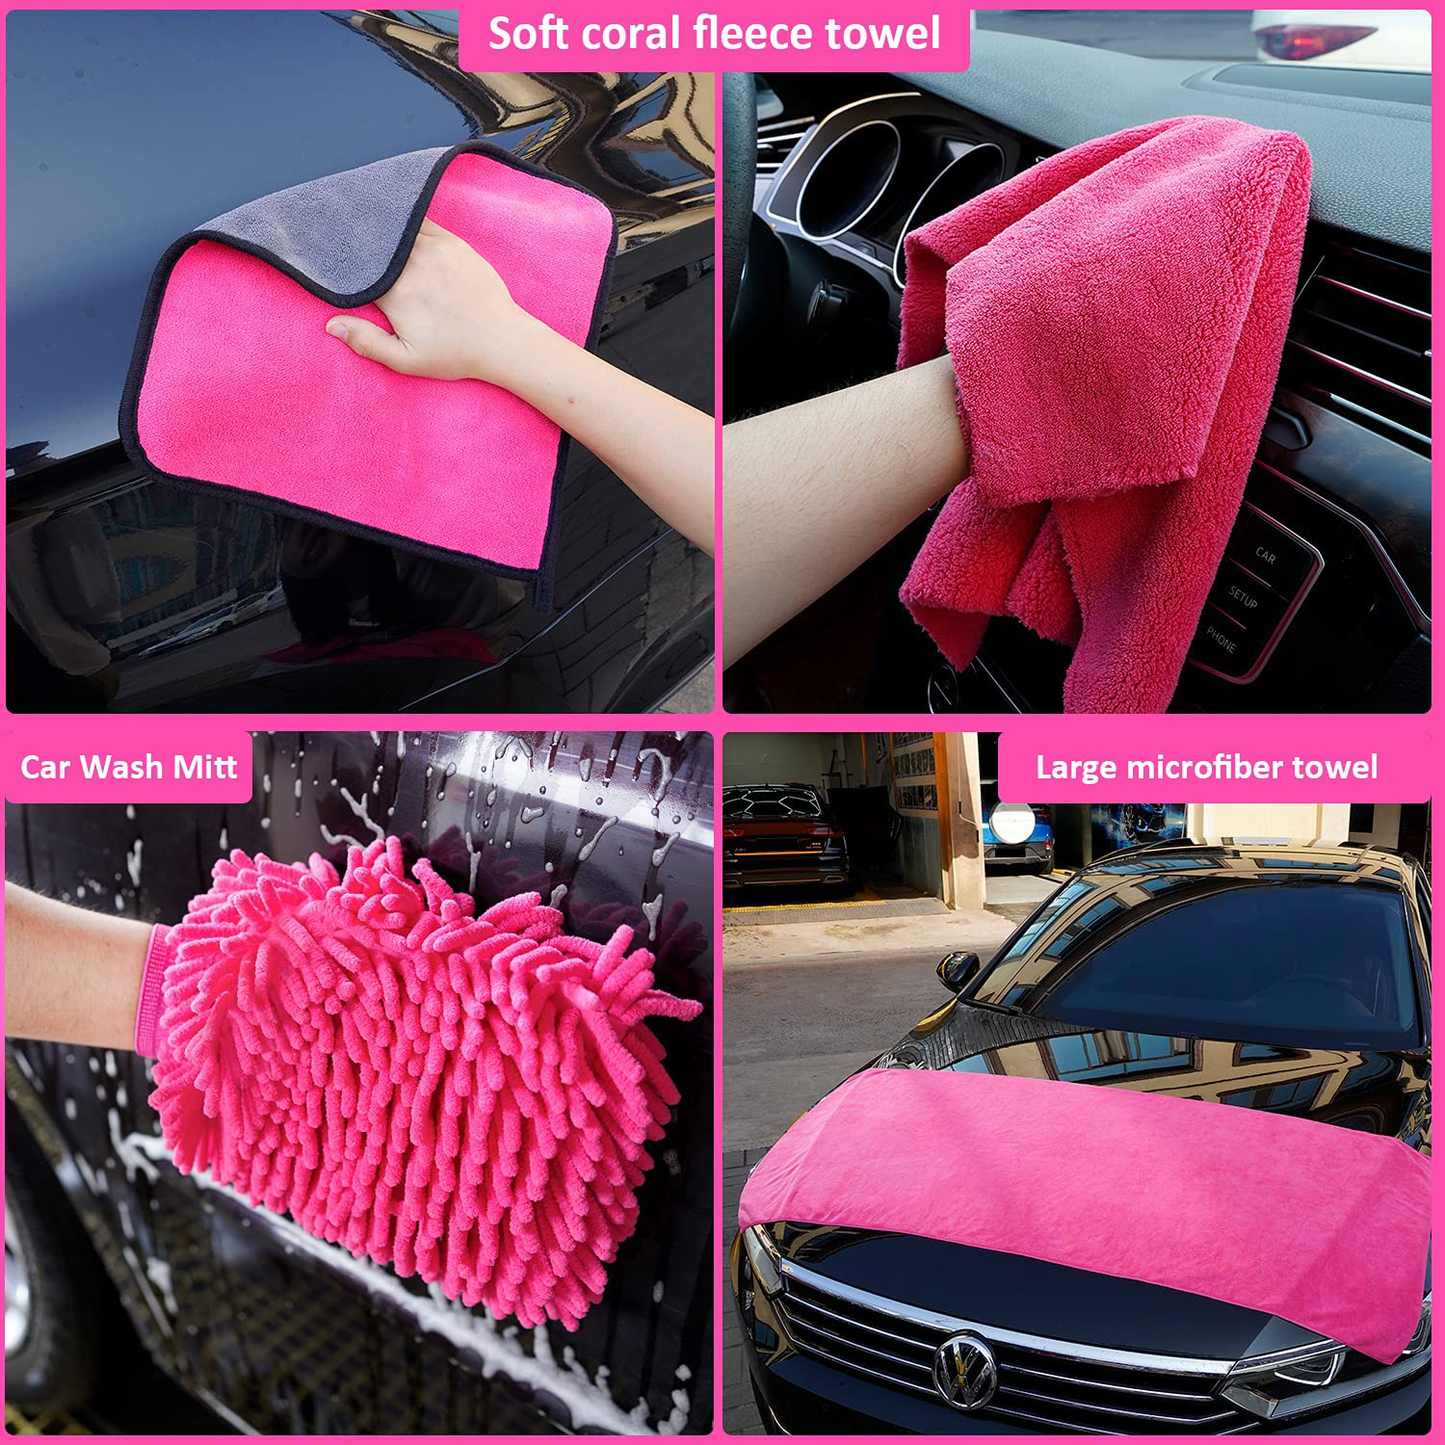 HLWDFLZ 31pcs Car Cleaning Kit, Pink Car Wash Kit and Detailing kit - Car Detailing Brushs, Microfiber Cleaning Cloth, Tire Brush, Window Scraper for Cleaning Car Interior Exterior